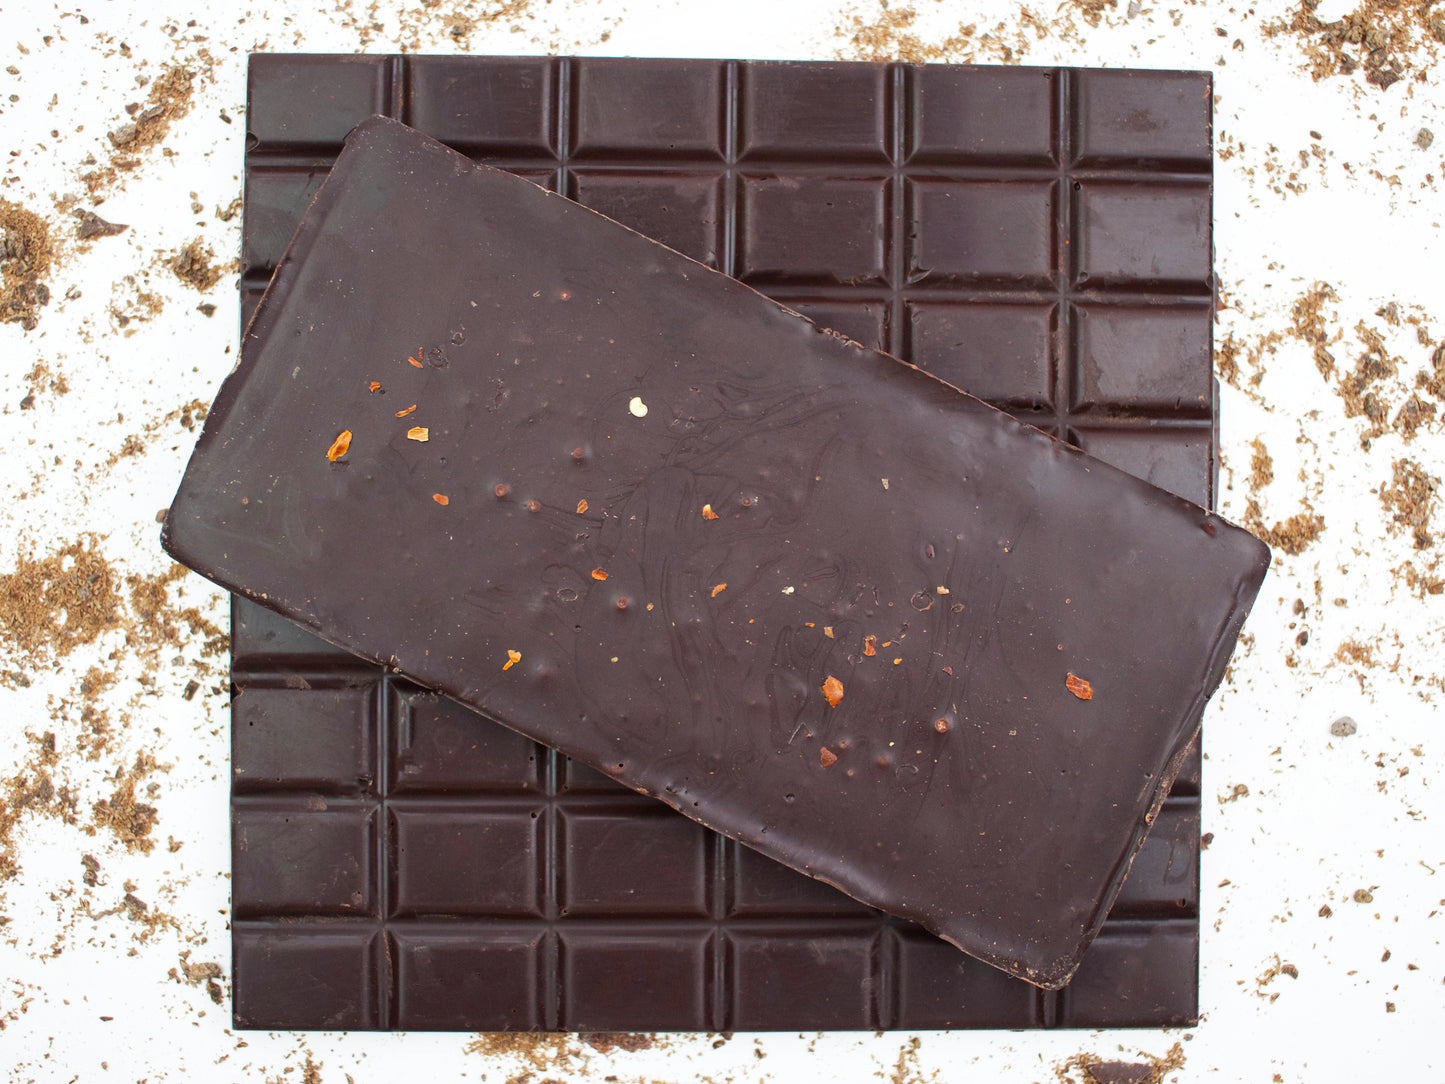 image shows 3, 100g hand made dark chocolate chilli bars, 2 viewed from the top and 1 viewed from the underside showing chilli flakes